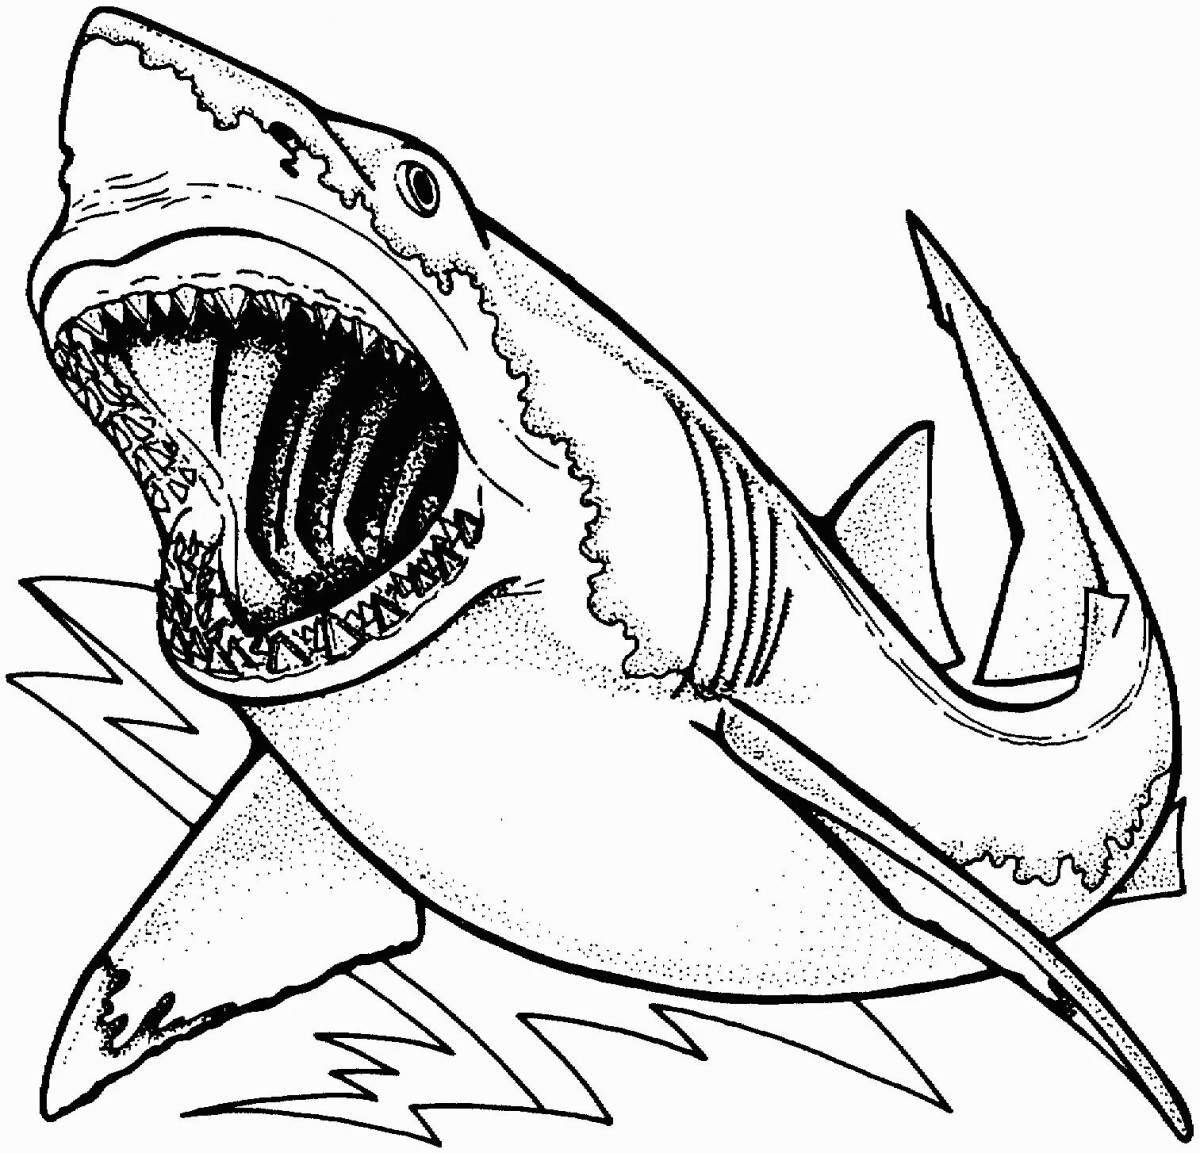 Creative shark coloring book for 6-7 year olds